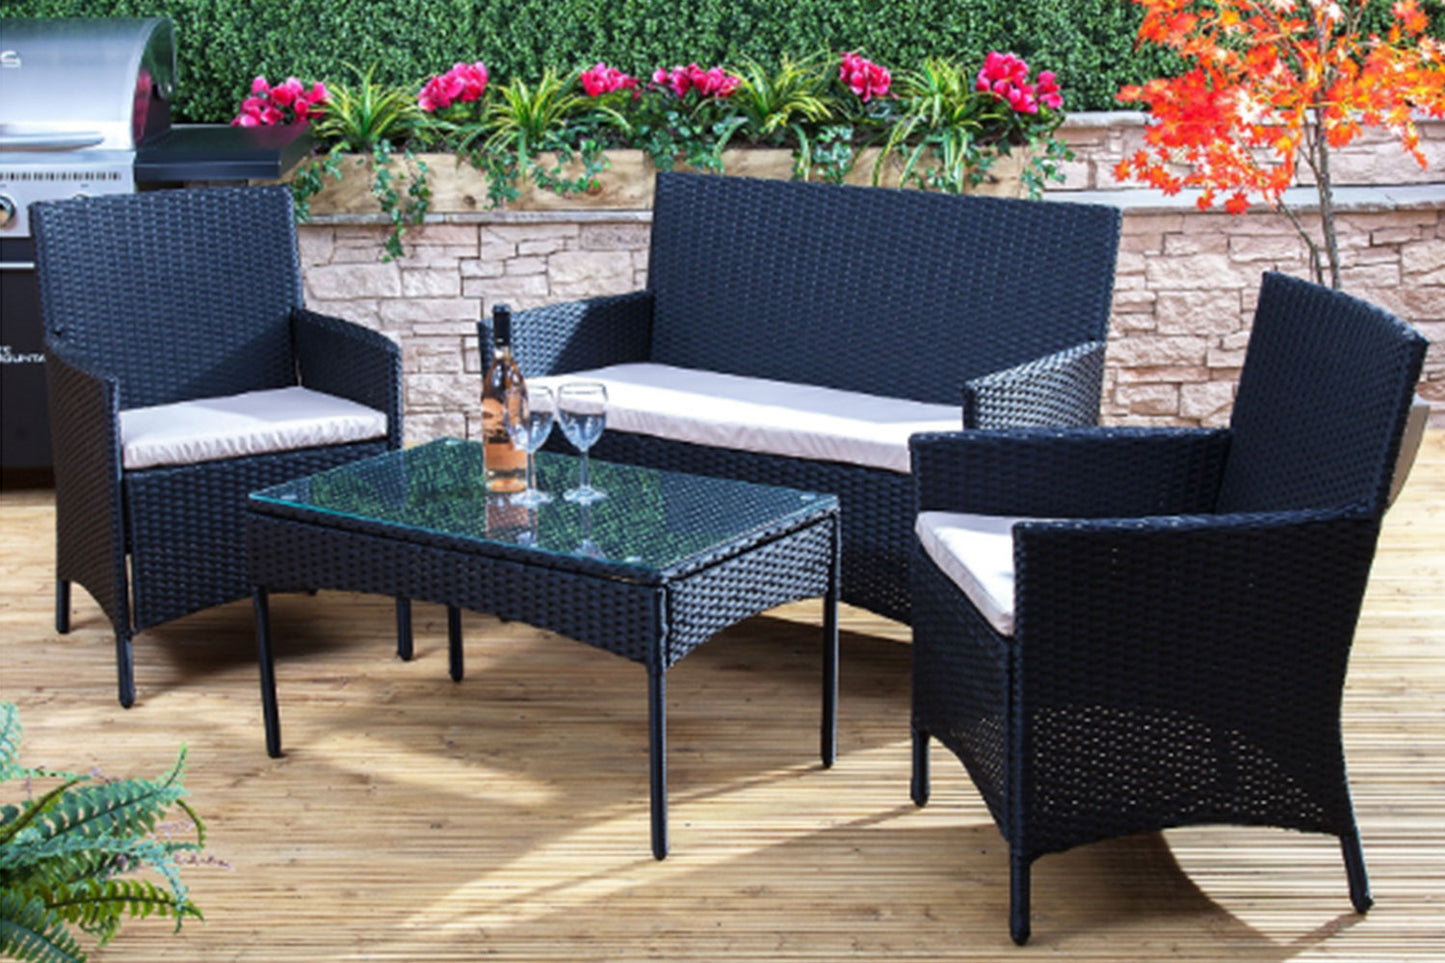 Rattan Waved 4 Piece Outdoor Sofa Set with Coffee Table